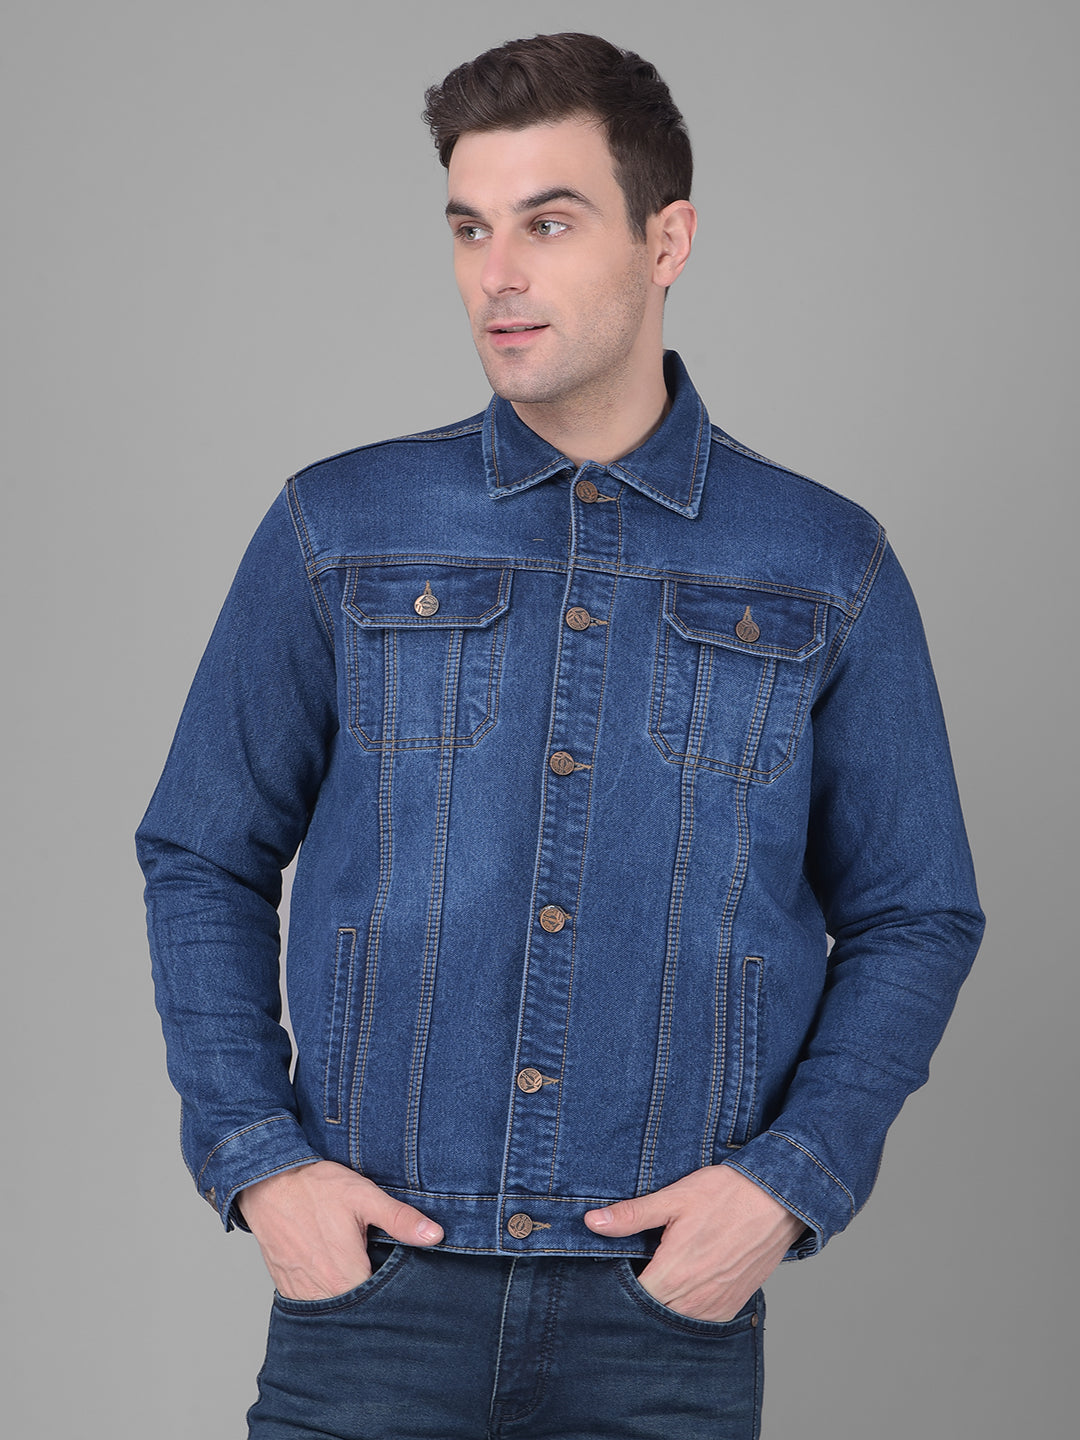 Buy Mens Jackets online at Best Price | Cobb Italy